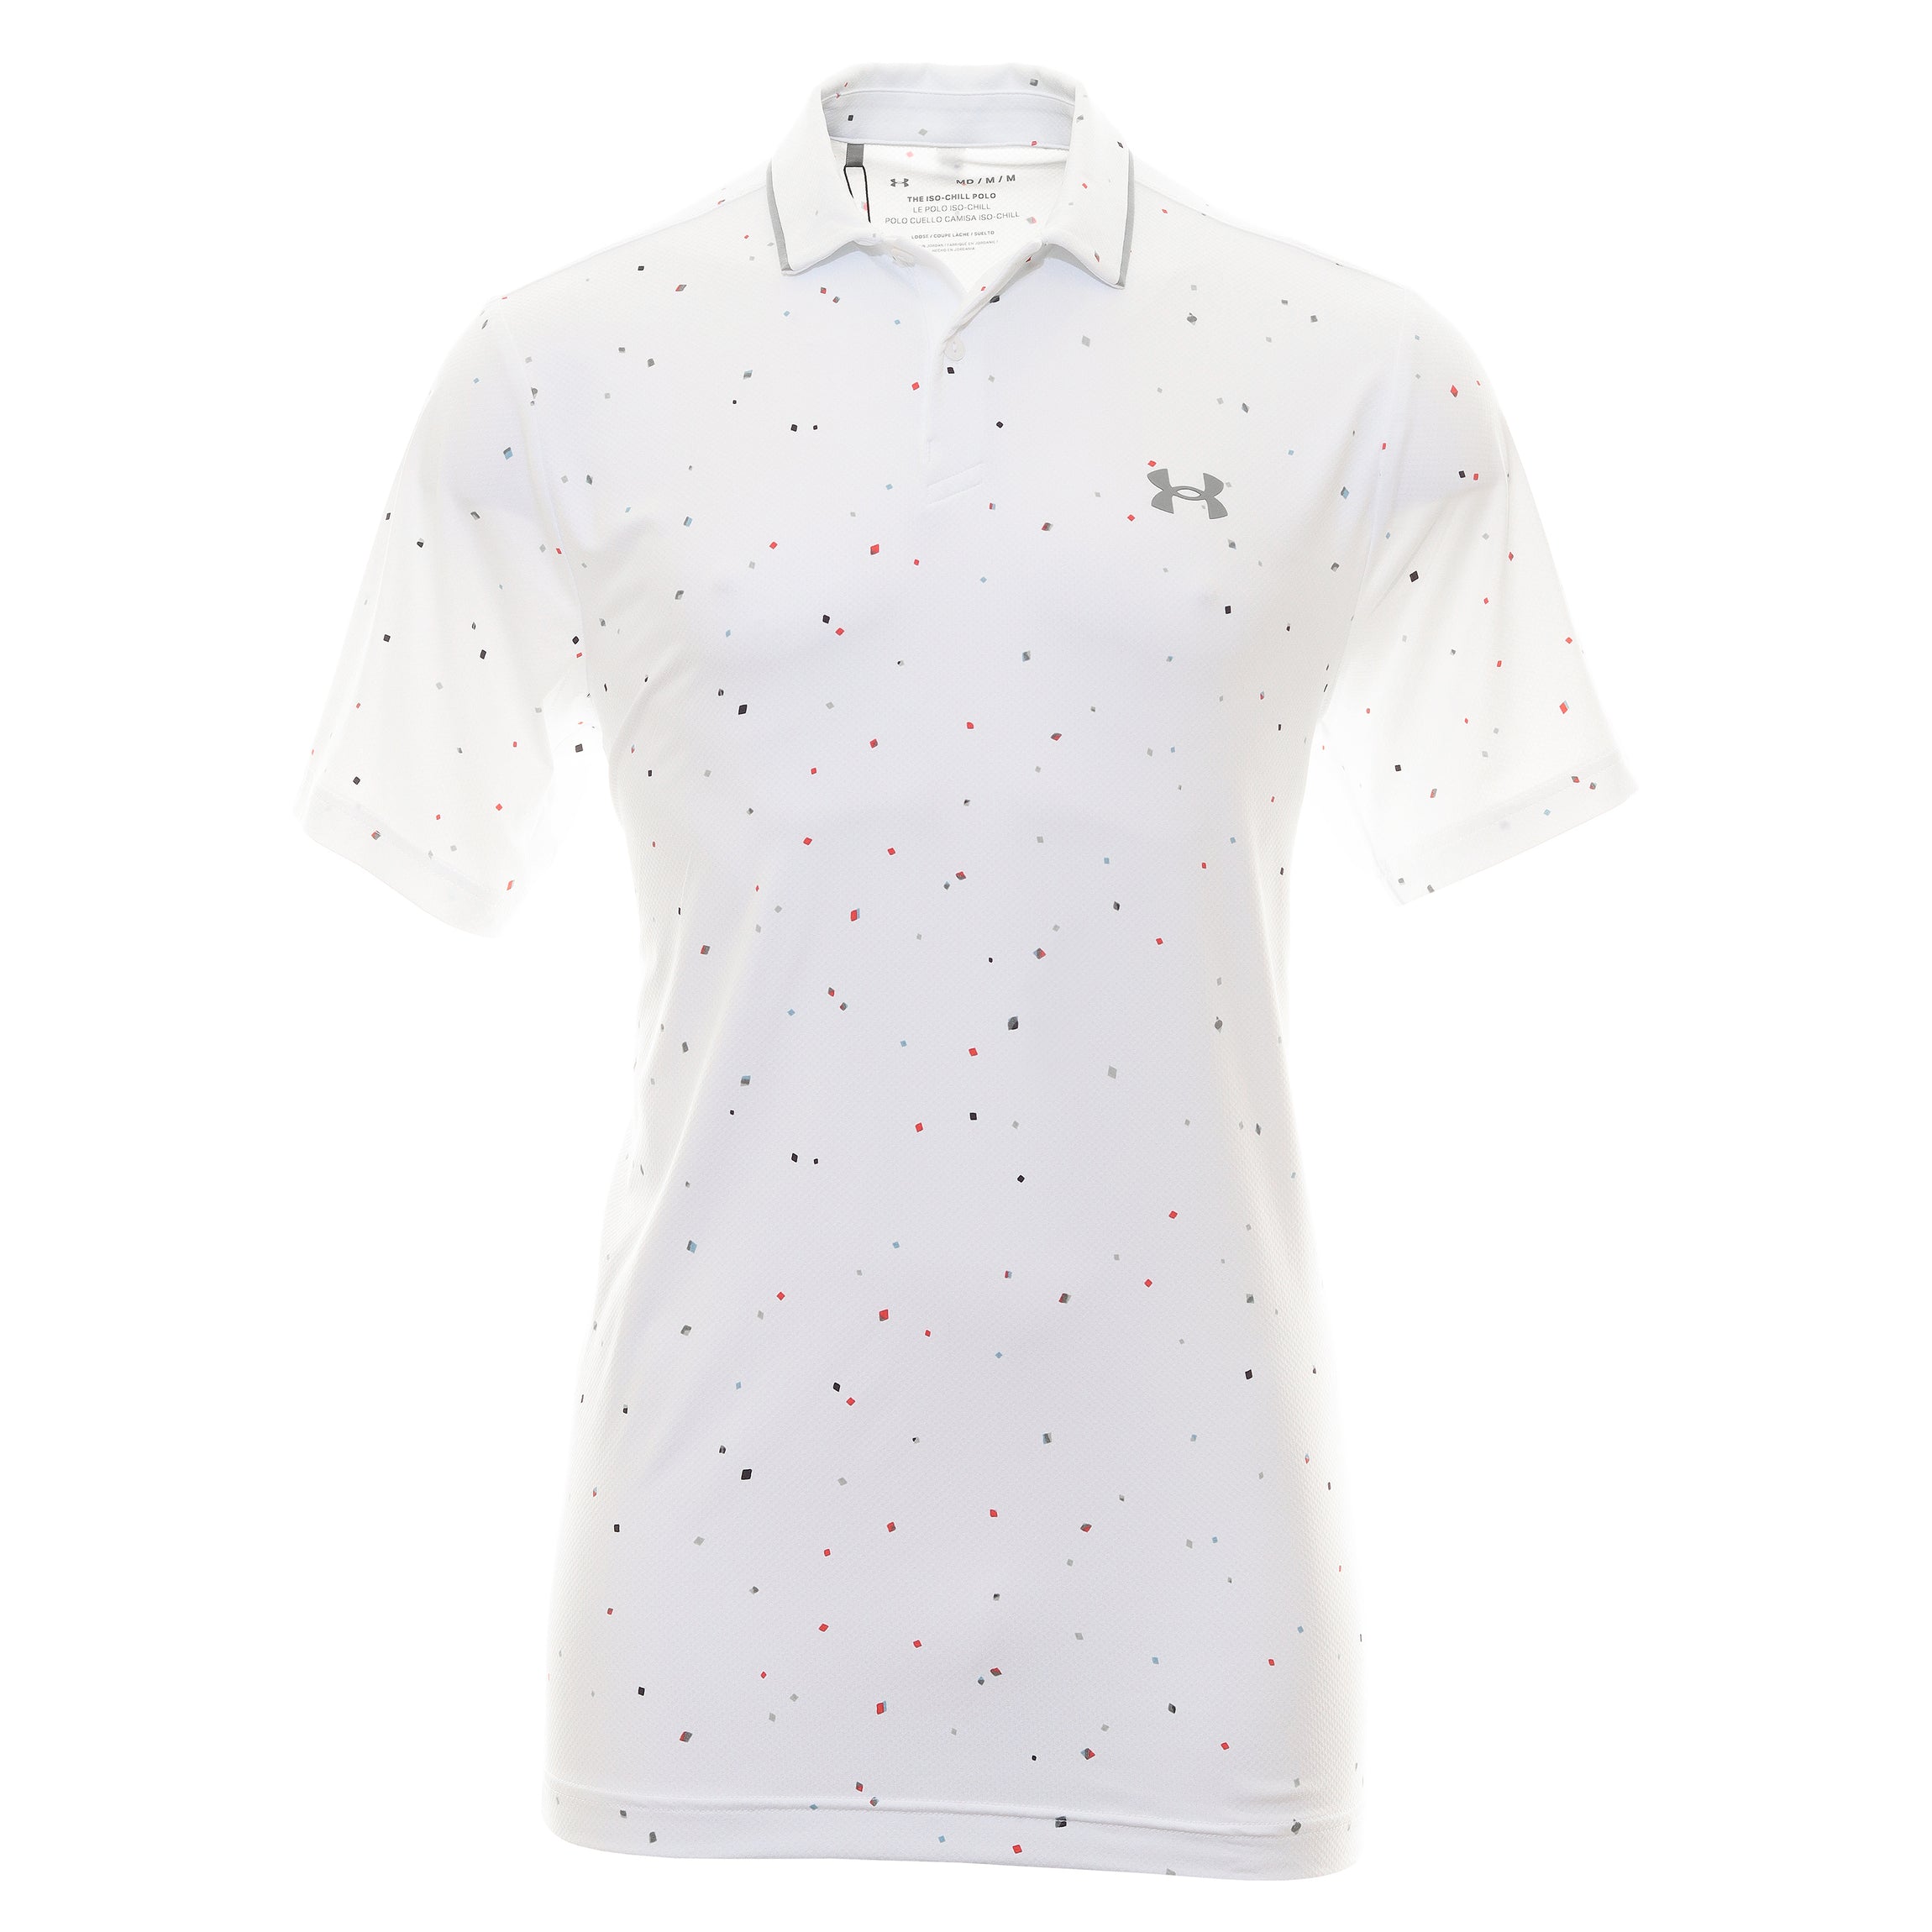 Under Armour Golf Iso-Chill Verge Shirt 1377366 White Grove Green 101, Function18